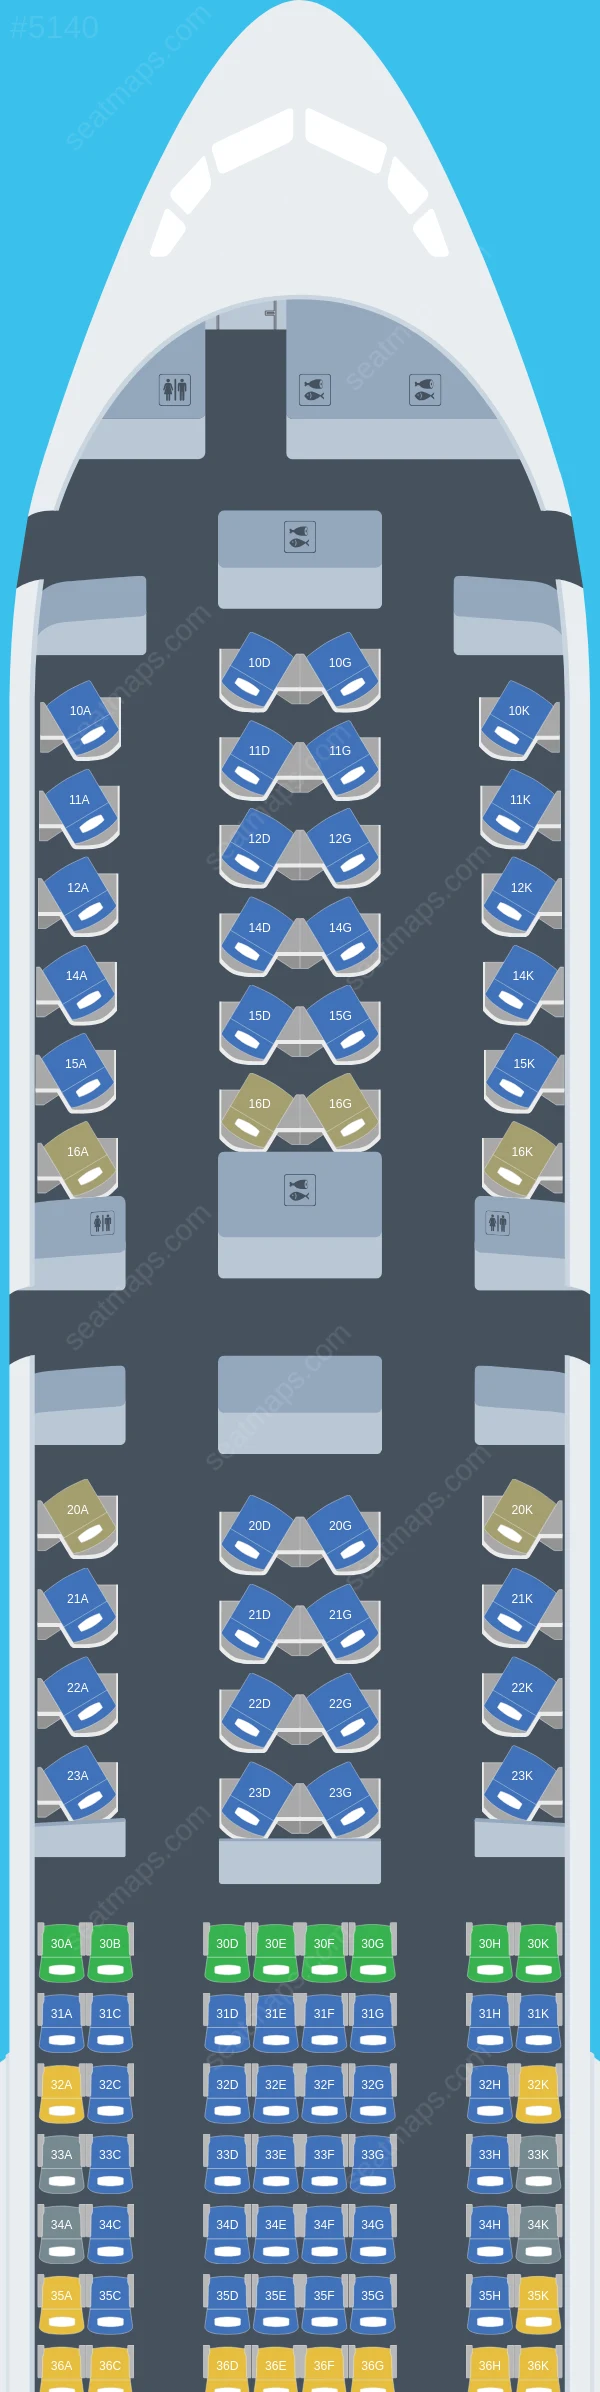 China Airlines Boeing 777-300ER seatmap preview